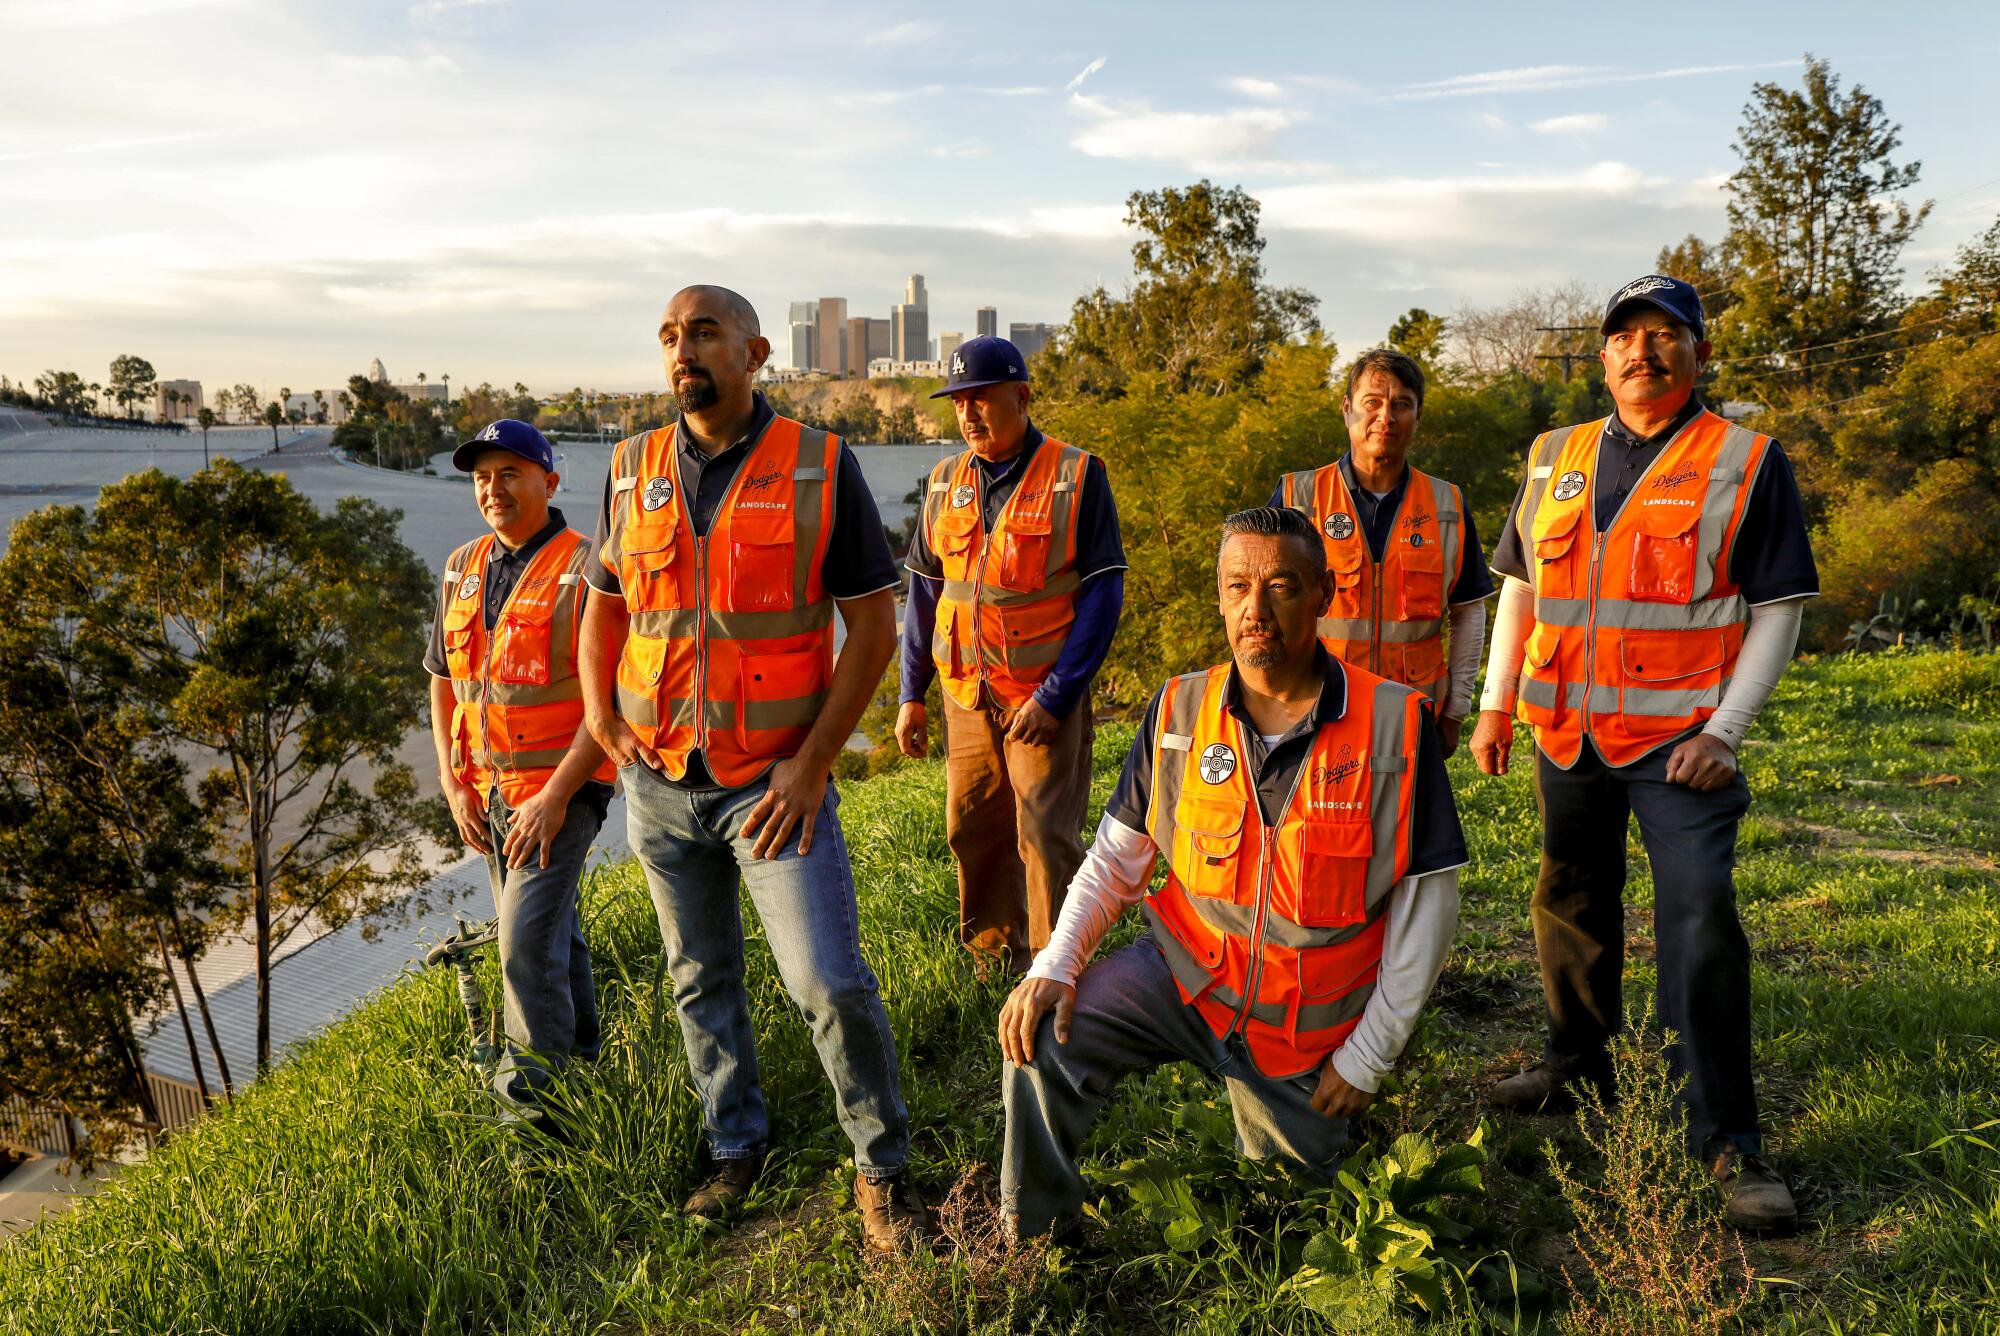 Chaz Perea, director of landscaping at Dodger Stadium, second from left, is photographed with his landscaping team